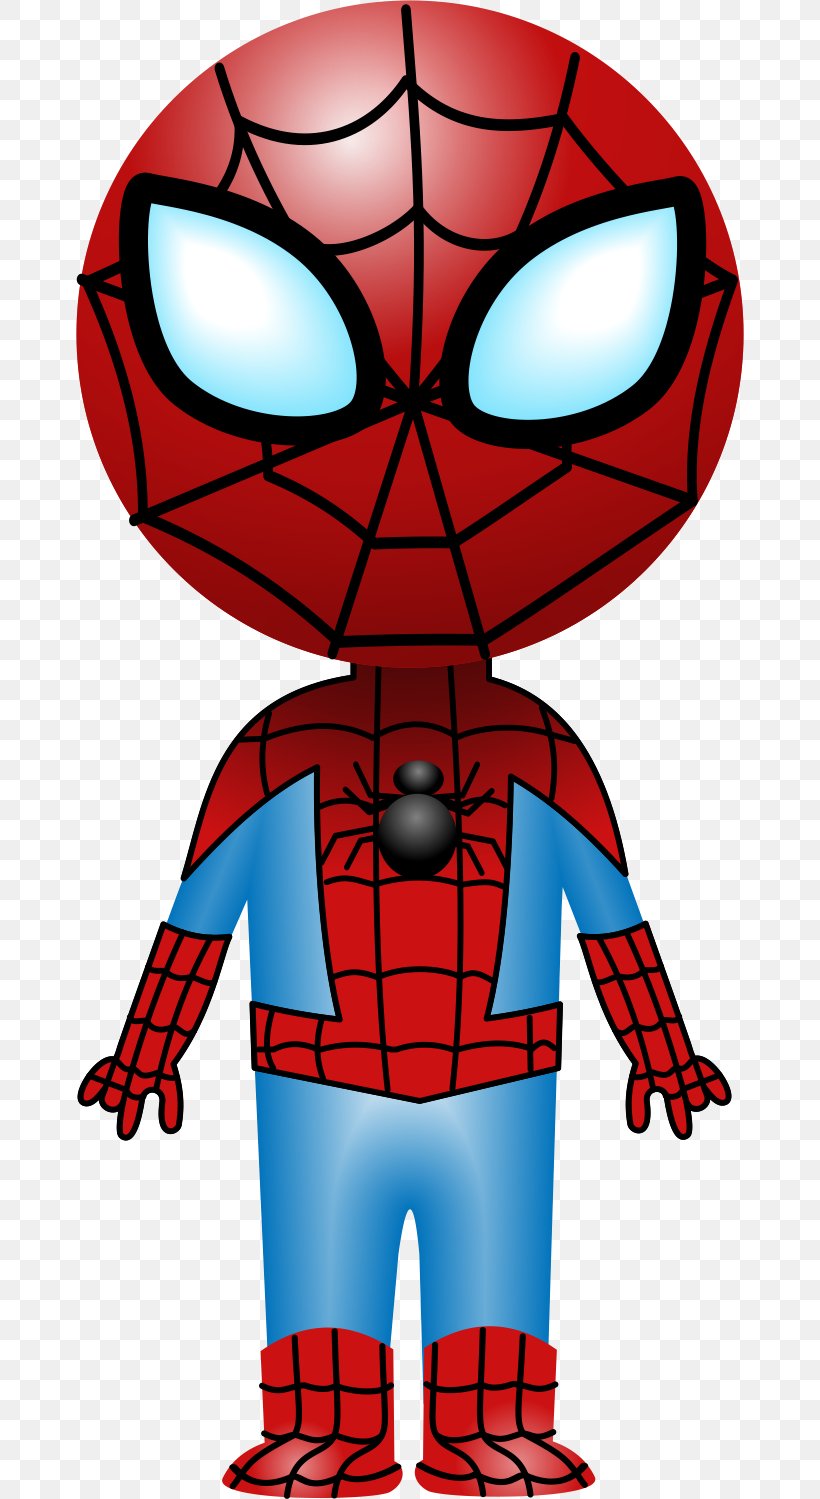 Spider-Man Superhero Image, PNG, 668x1499px, Spiderman, Art, Artwork, Drawing, Fictional Character Download Free